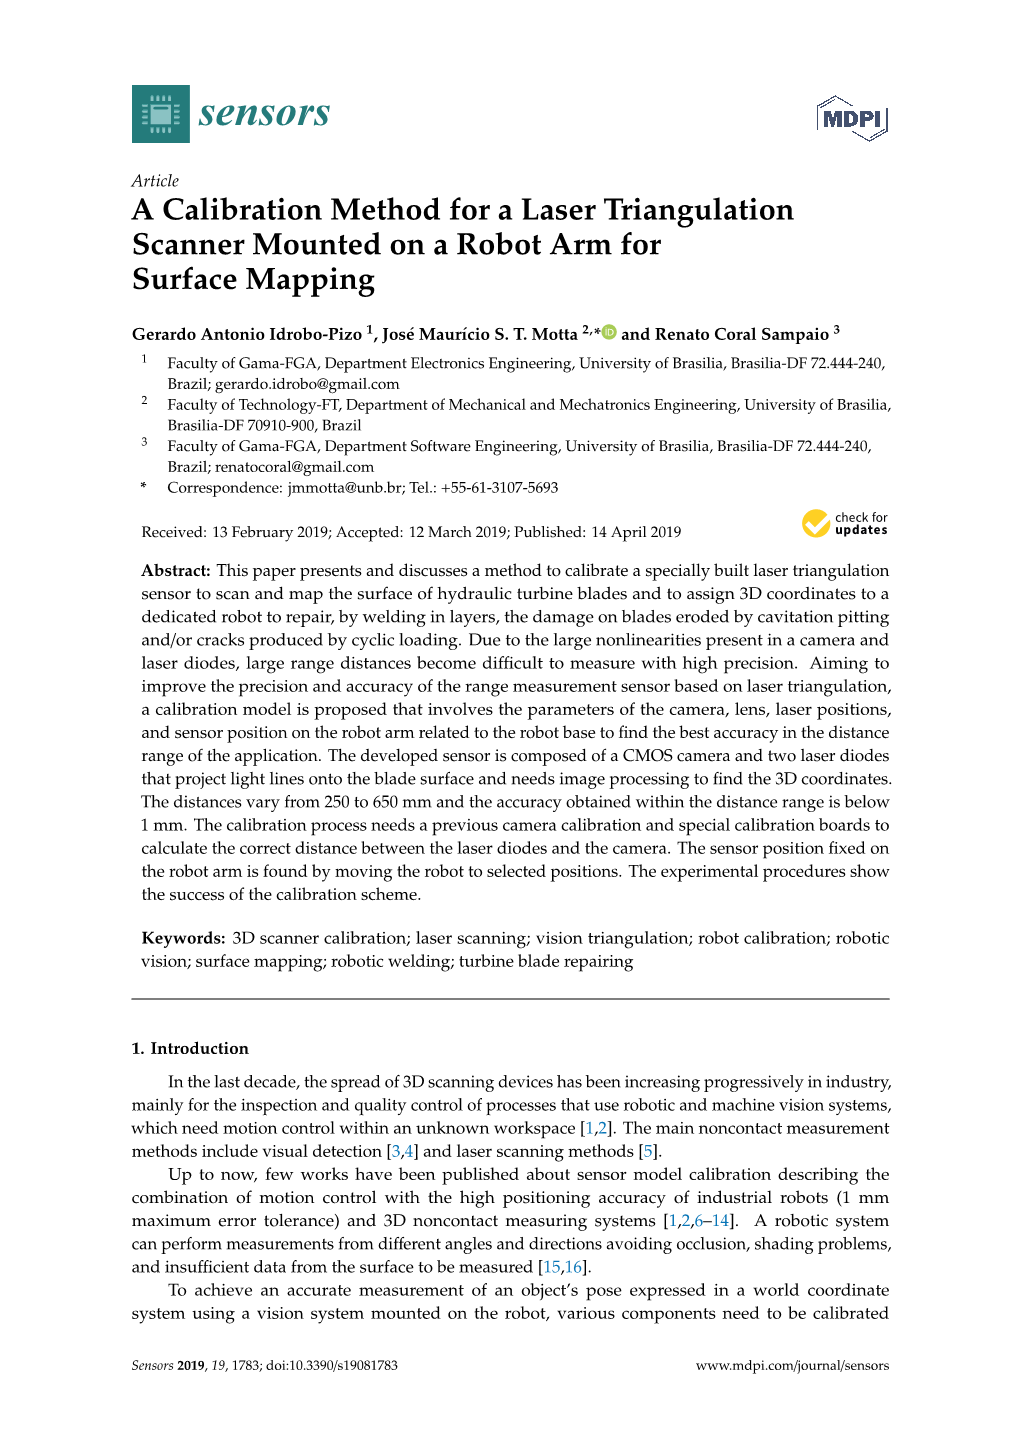 A Calibration Method for a Laser Triangulation Scanner Mounted on a Robot Arm for Surface Mapping